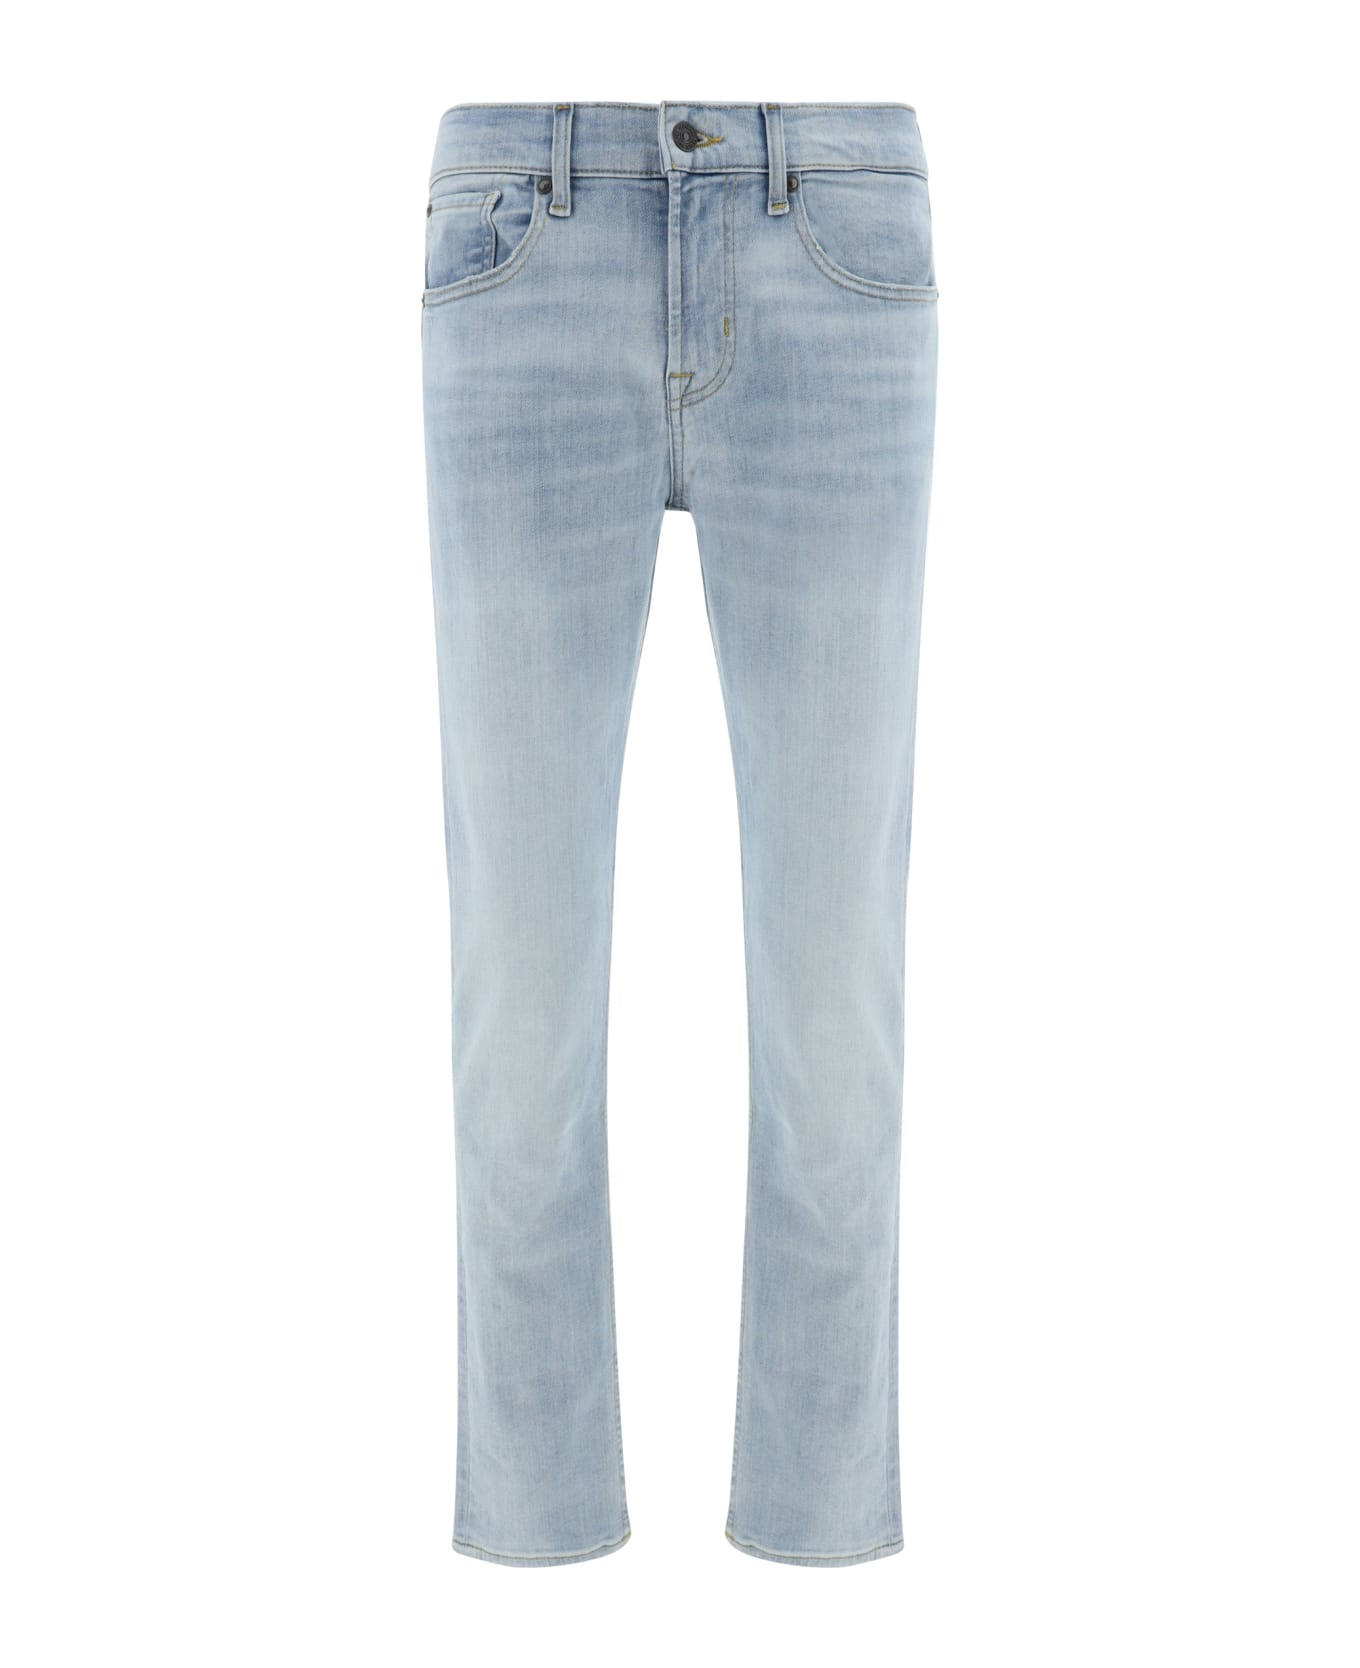 7 For All Mankind Jeans - Light Blue デニム